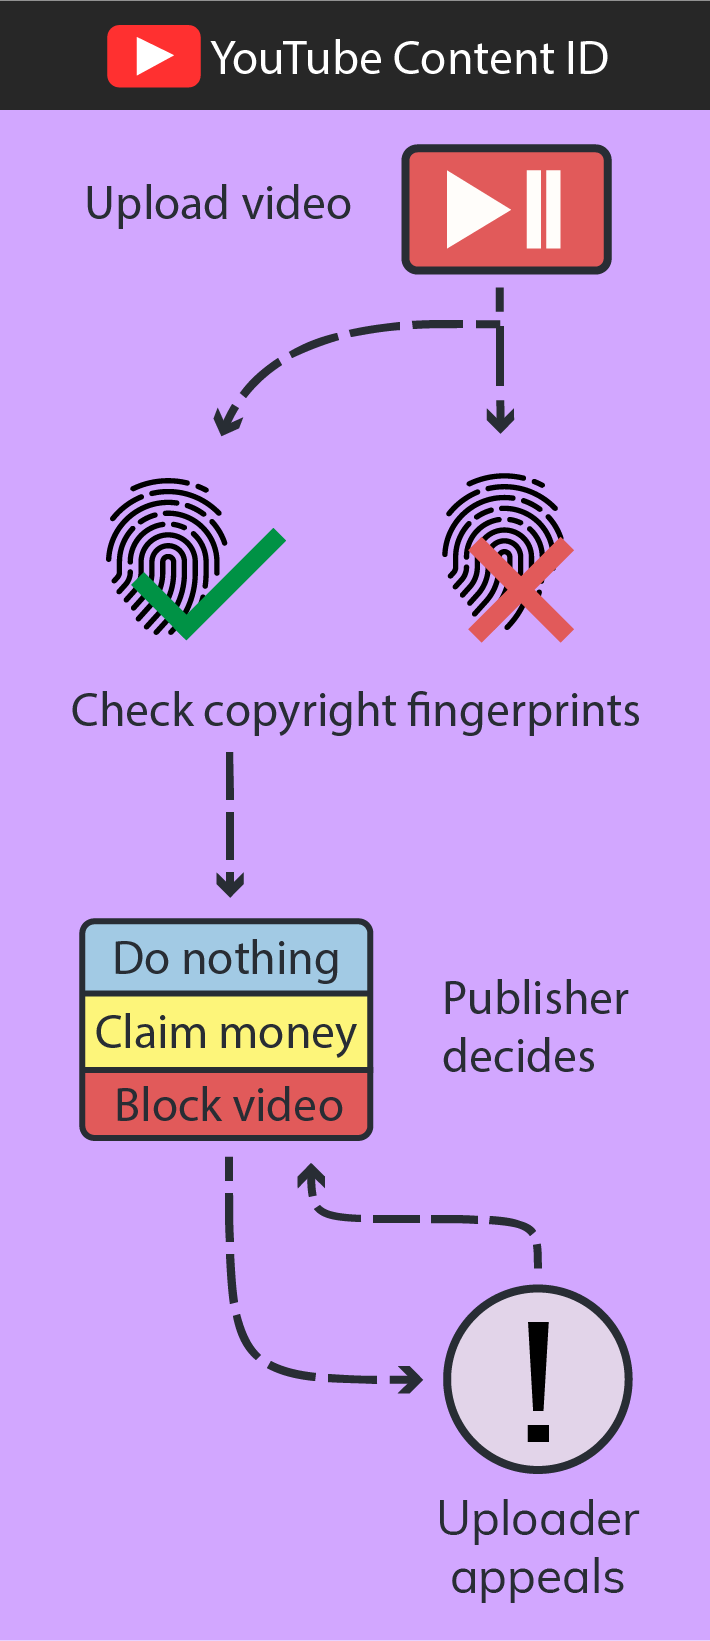 Infographic displaying the copyright fingerprinting process